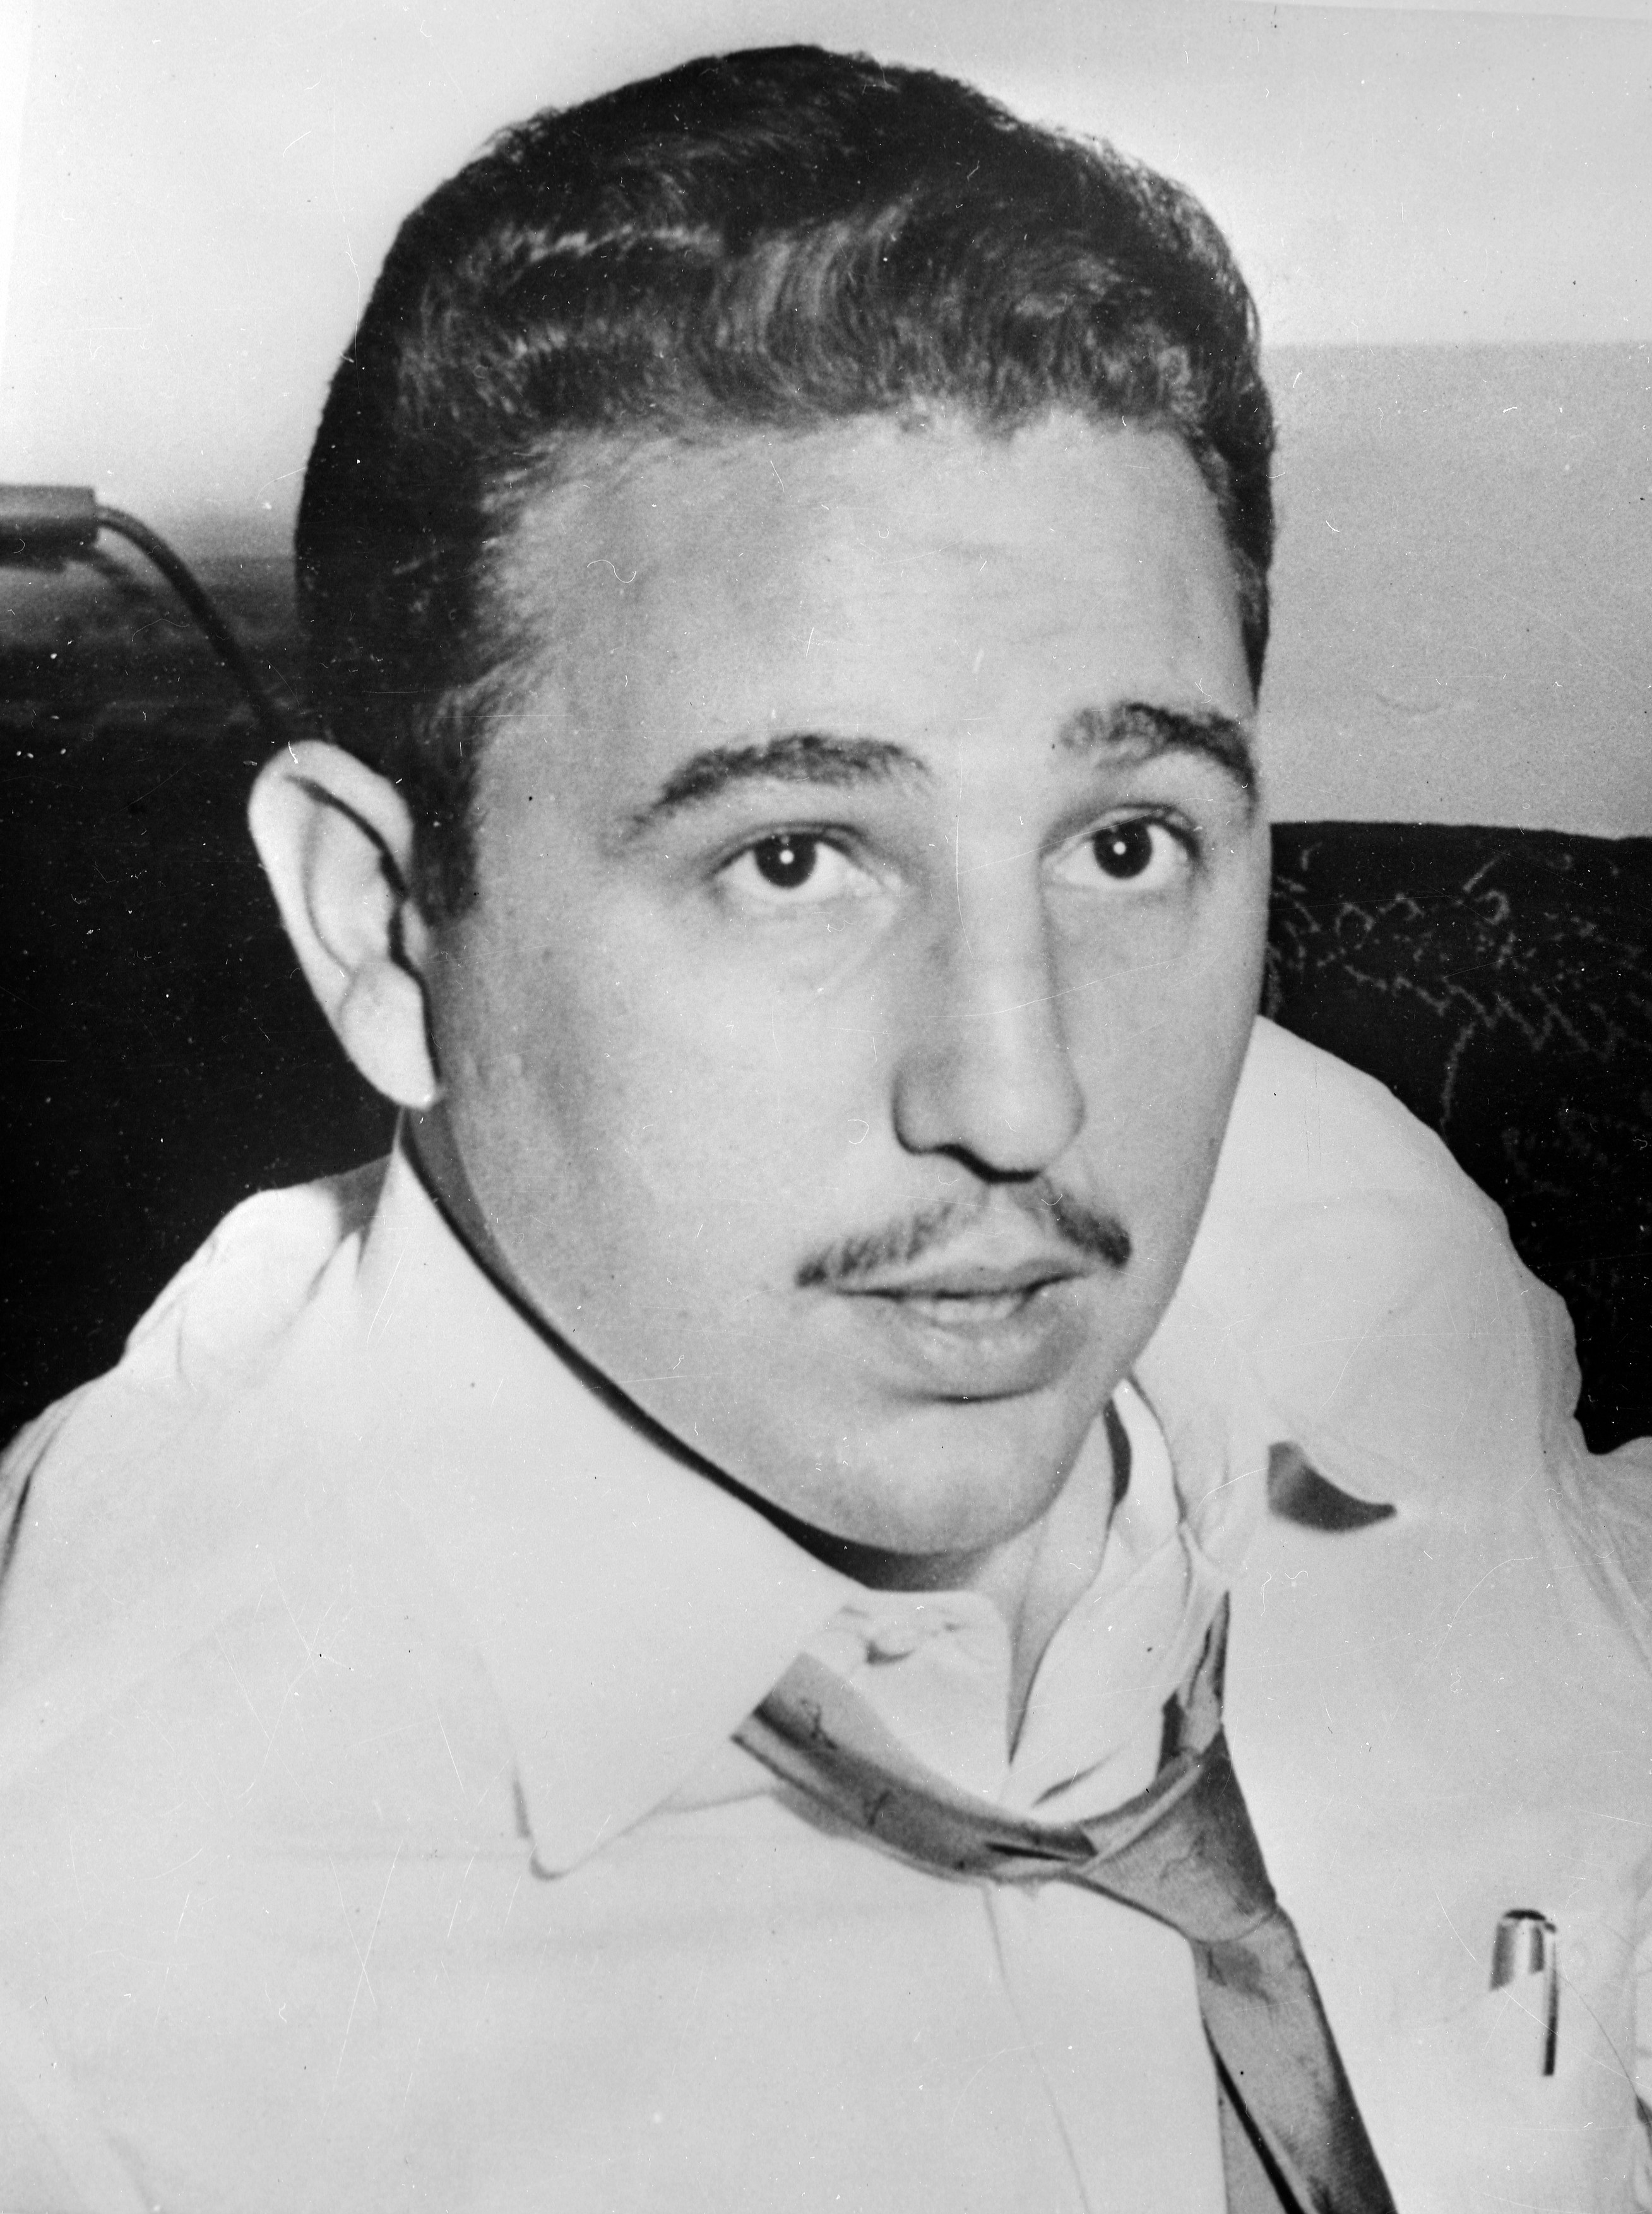 New York: Beardless, and rather boyish looking Fidel Castro, pictured in 1955 here when he was busy raising funds for his Cuban Revolution to oust Dictator Batista. Castro, a familiar figure among the city's Cuban leaders, is now Cuban Premier. 17 October 1962, Image: 23975330, License: Rights-managed, Restrictions: , Model Release: no, Credit line: Profimedia, Topfoto